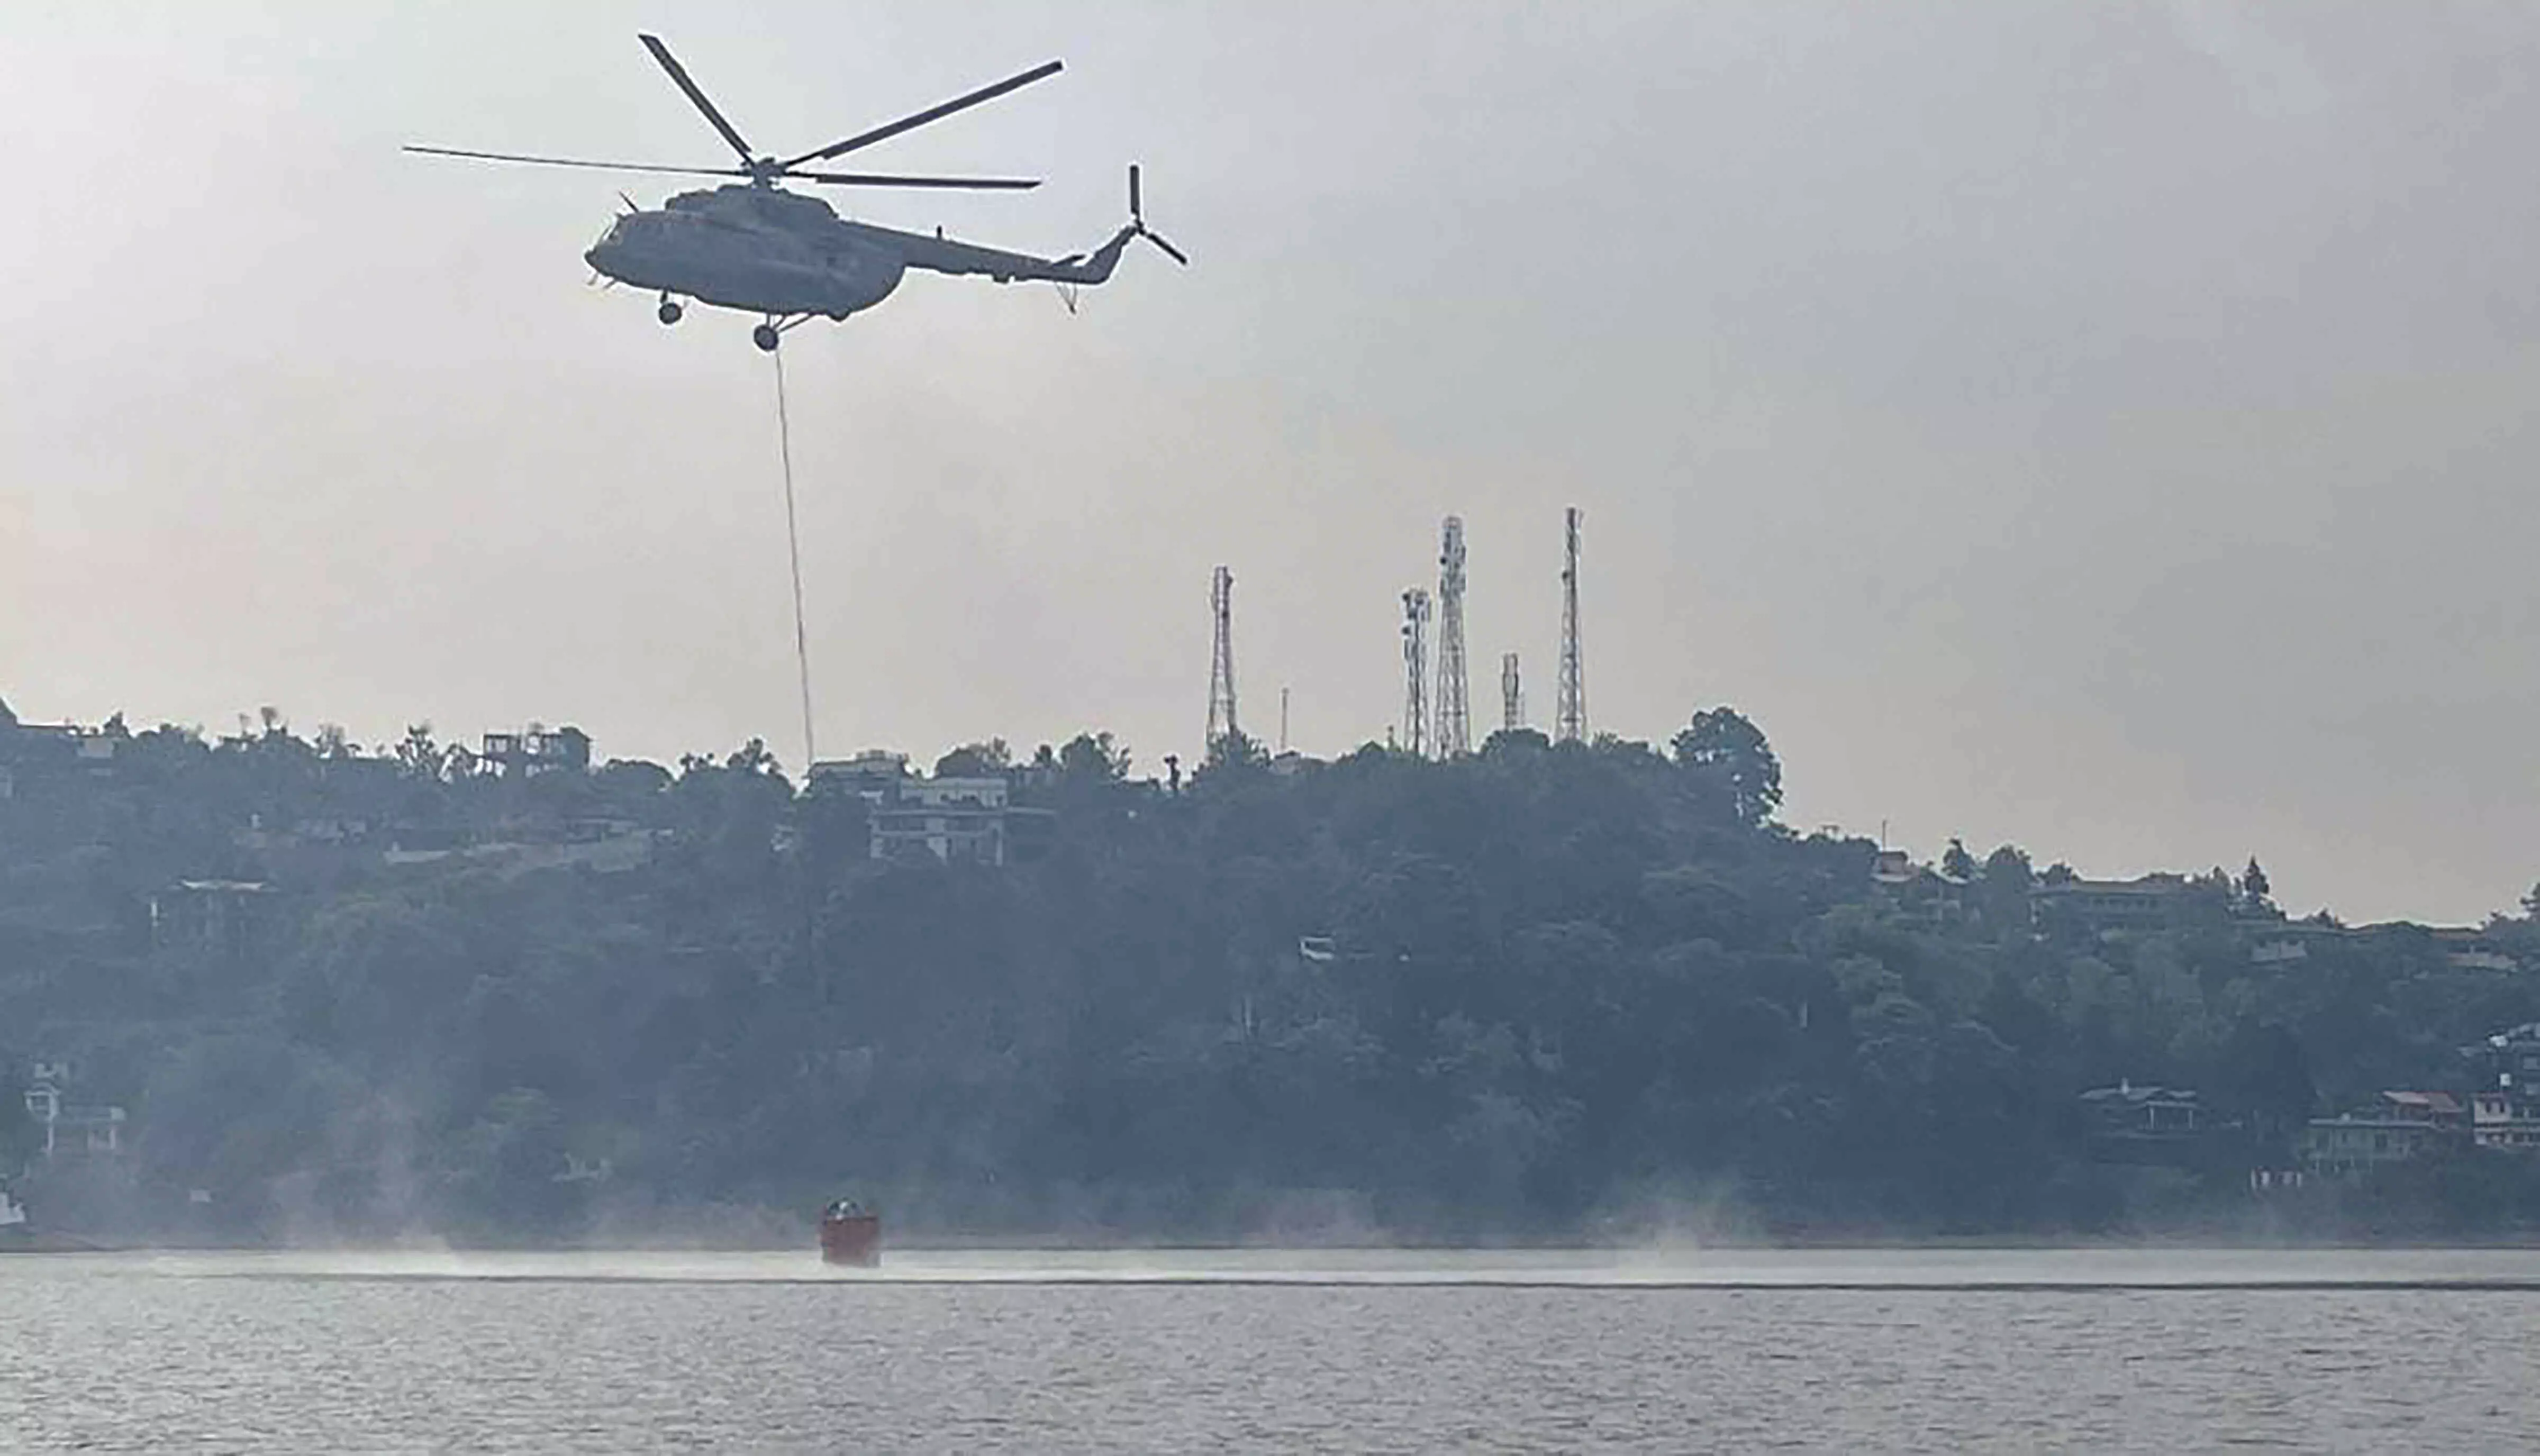 Ukhand forest fires: IAF helicopter assists in firefighting for 2nd day, blaze doused in many areas